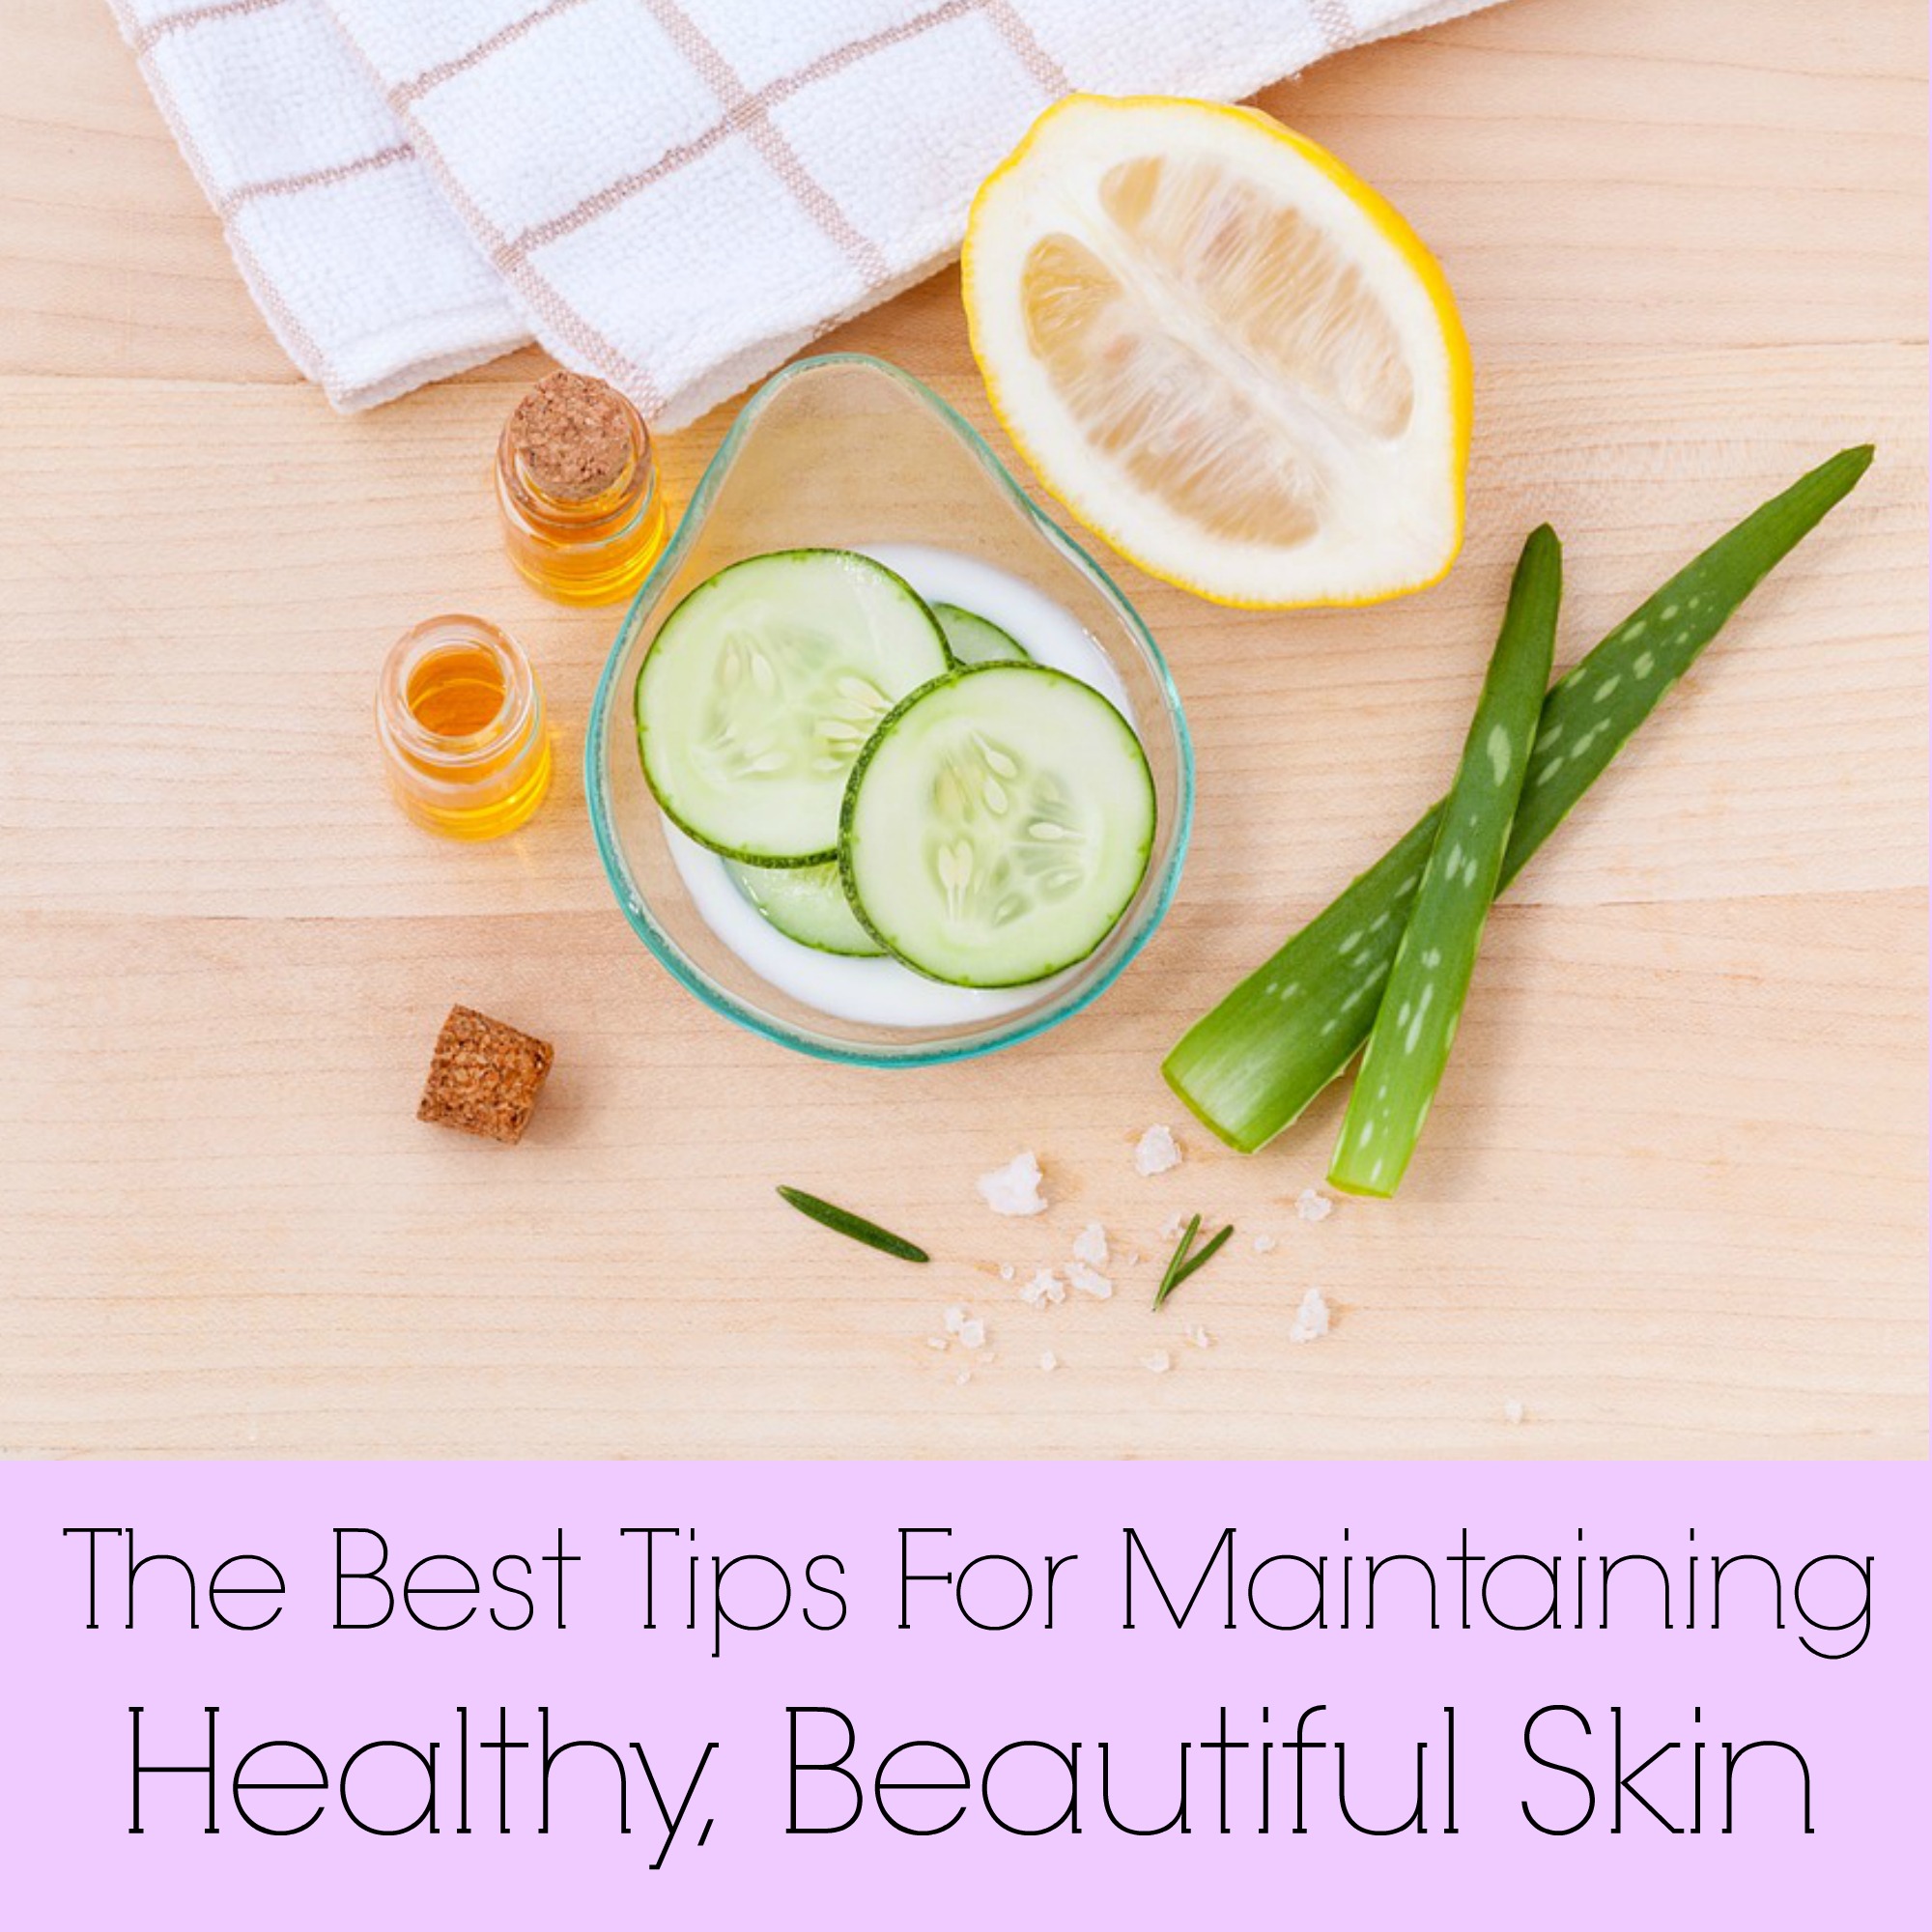 The Best Tips For Maintaining Healthy, Beautiful Skin